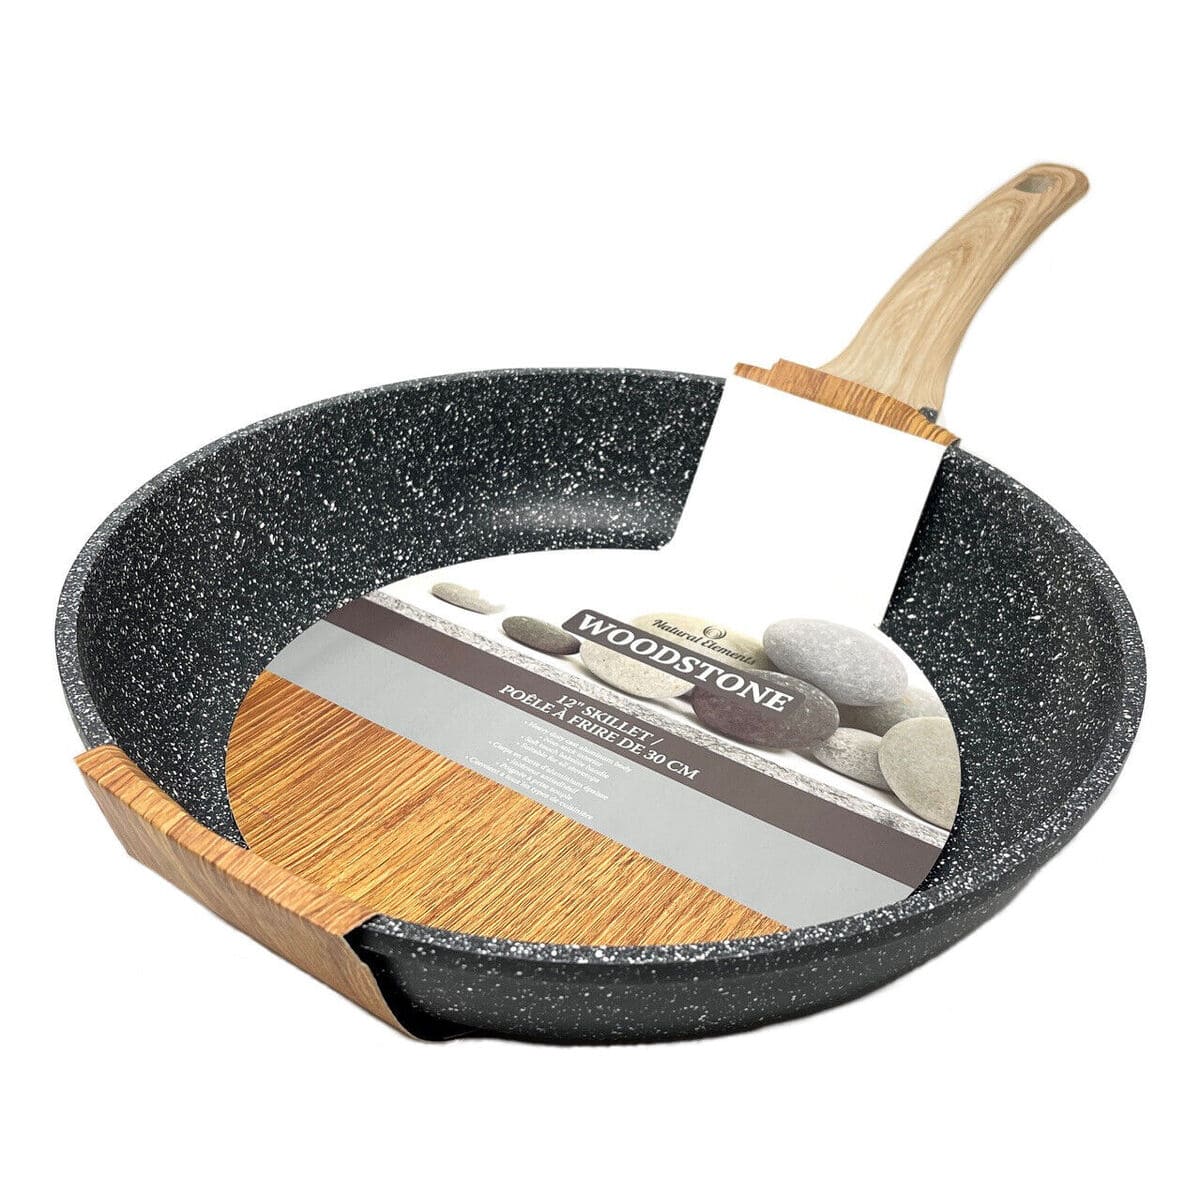 Is Woodstone Cookware Safe